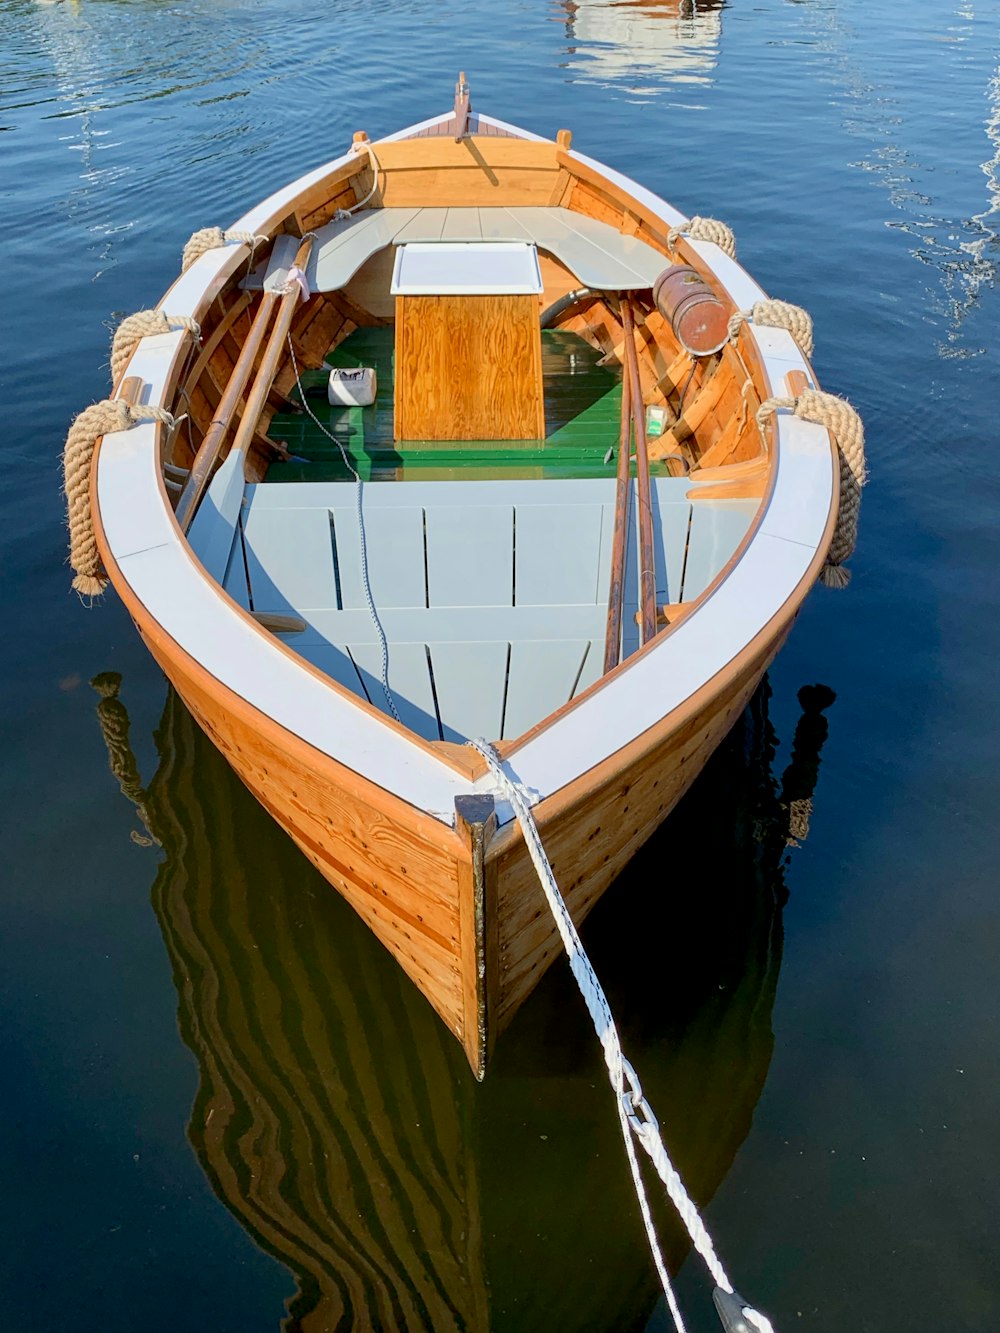 empty gray and brown boat on calm body of water